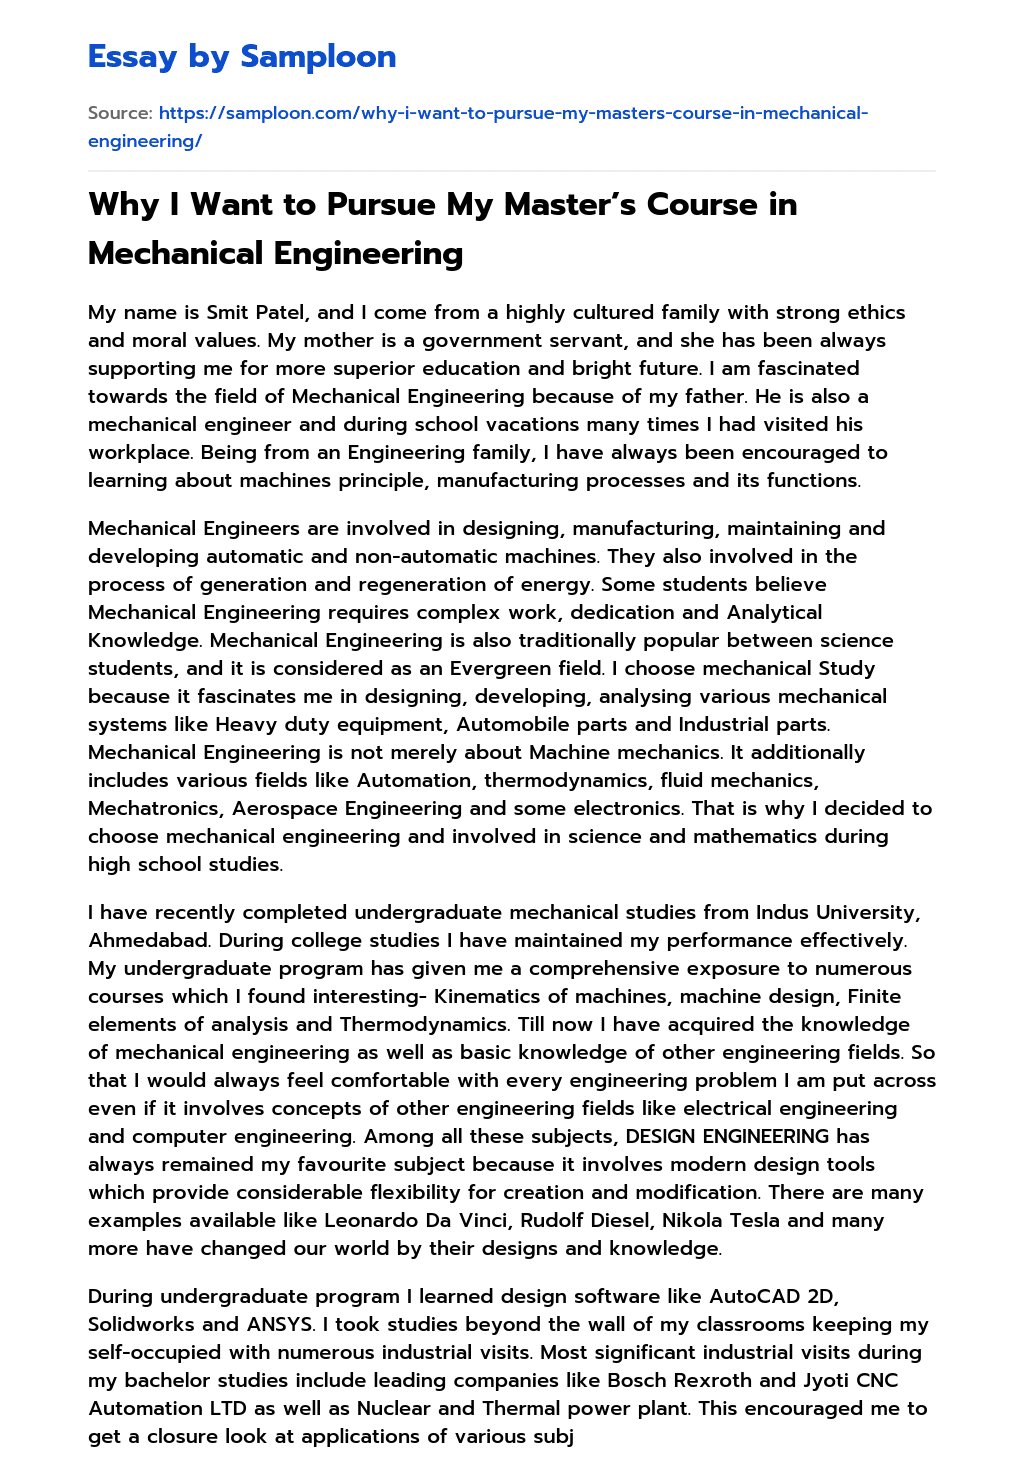 Why I Want to Pursue My Master’s Course in Mechanical Engineering essay